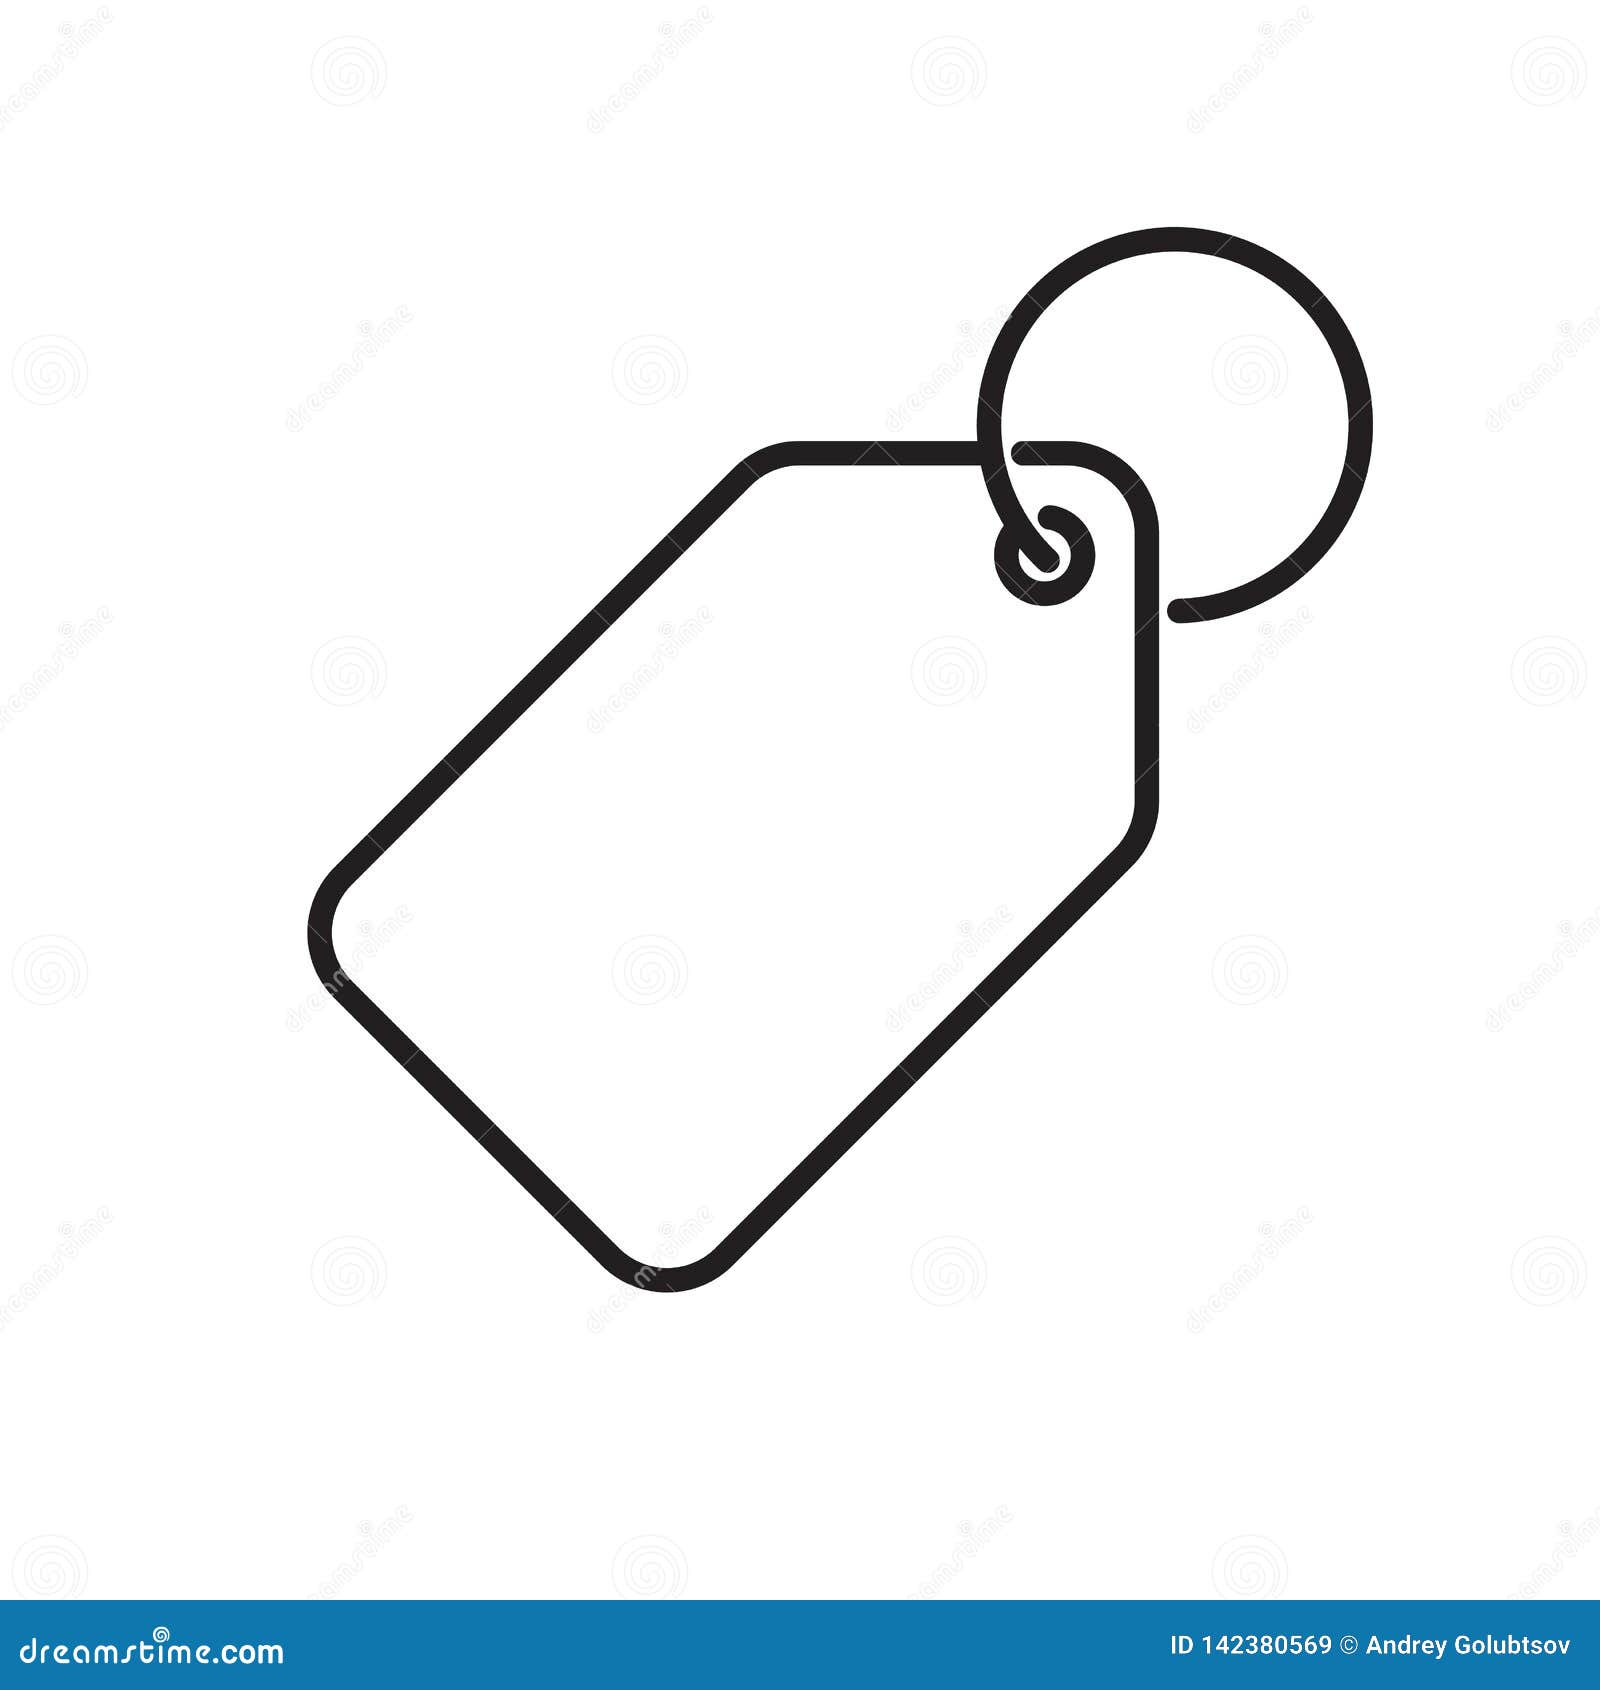 Price Tag Vector Icon Label. Pricetag with Ring, Luggage Tag or